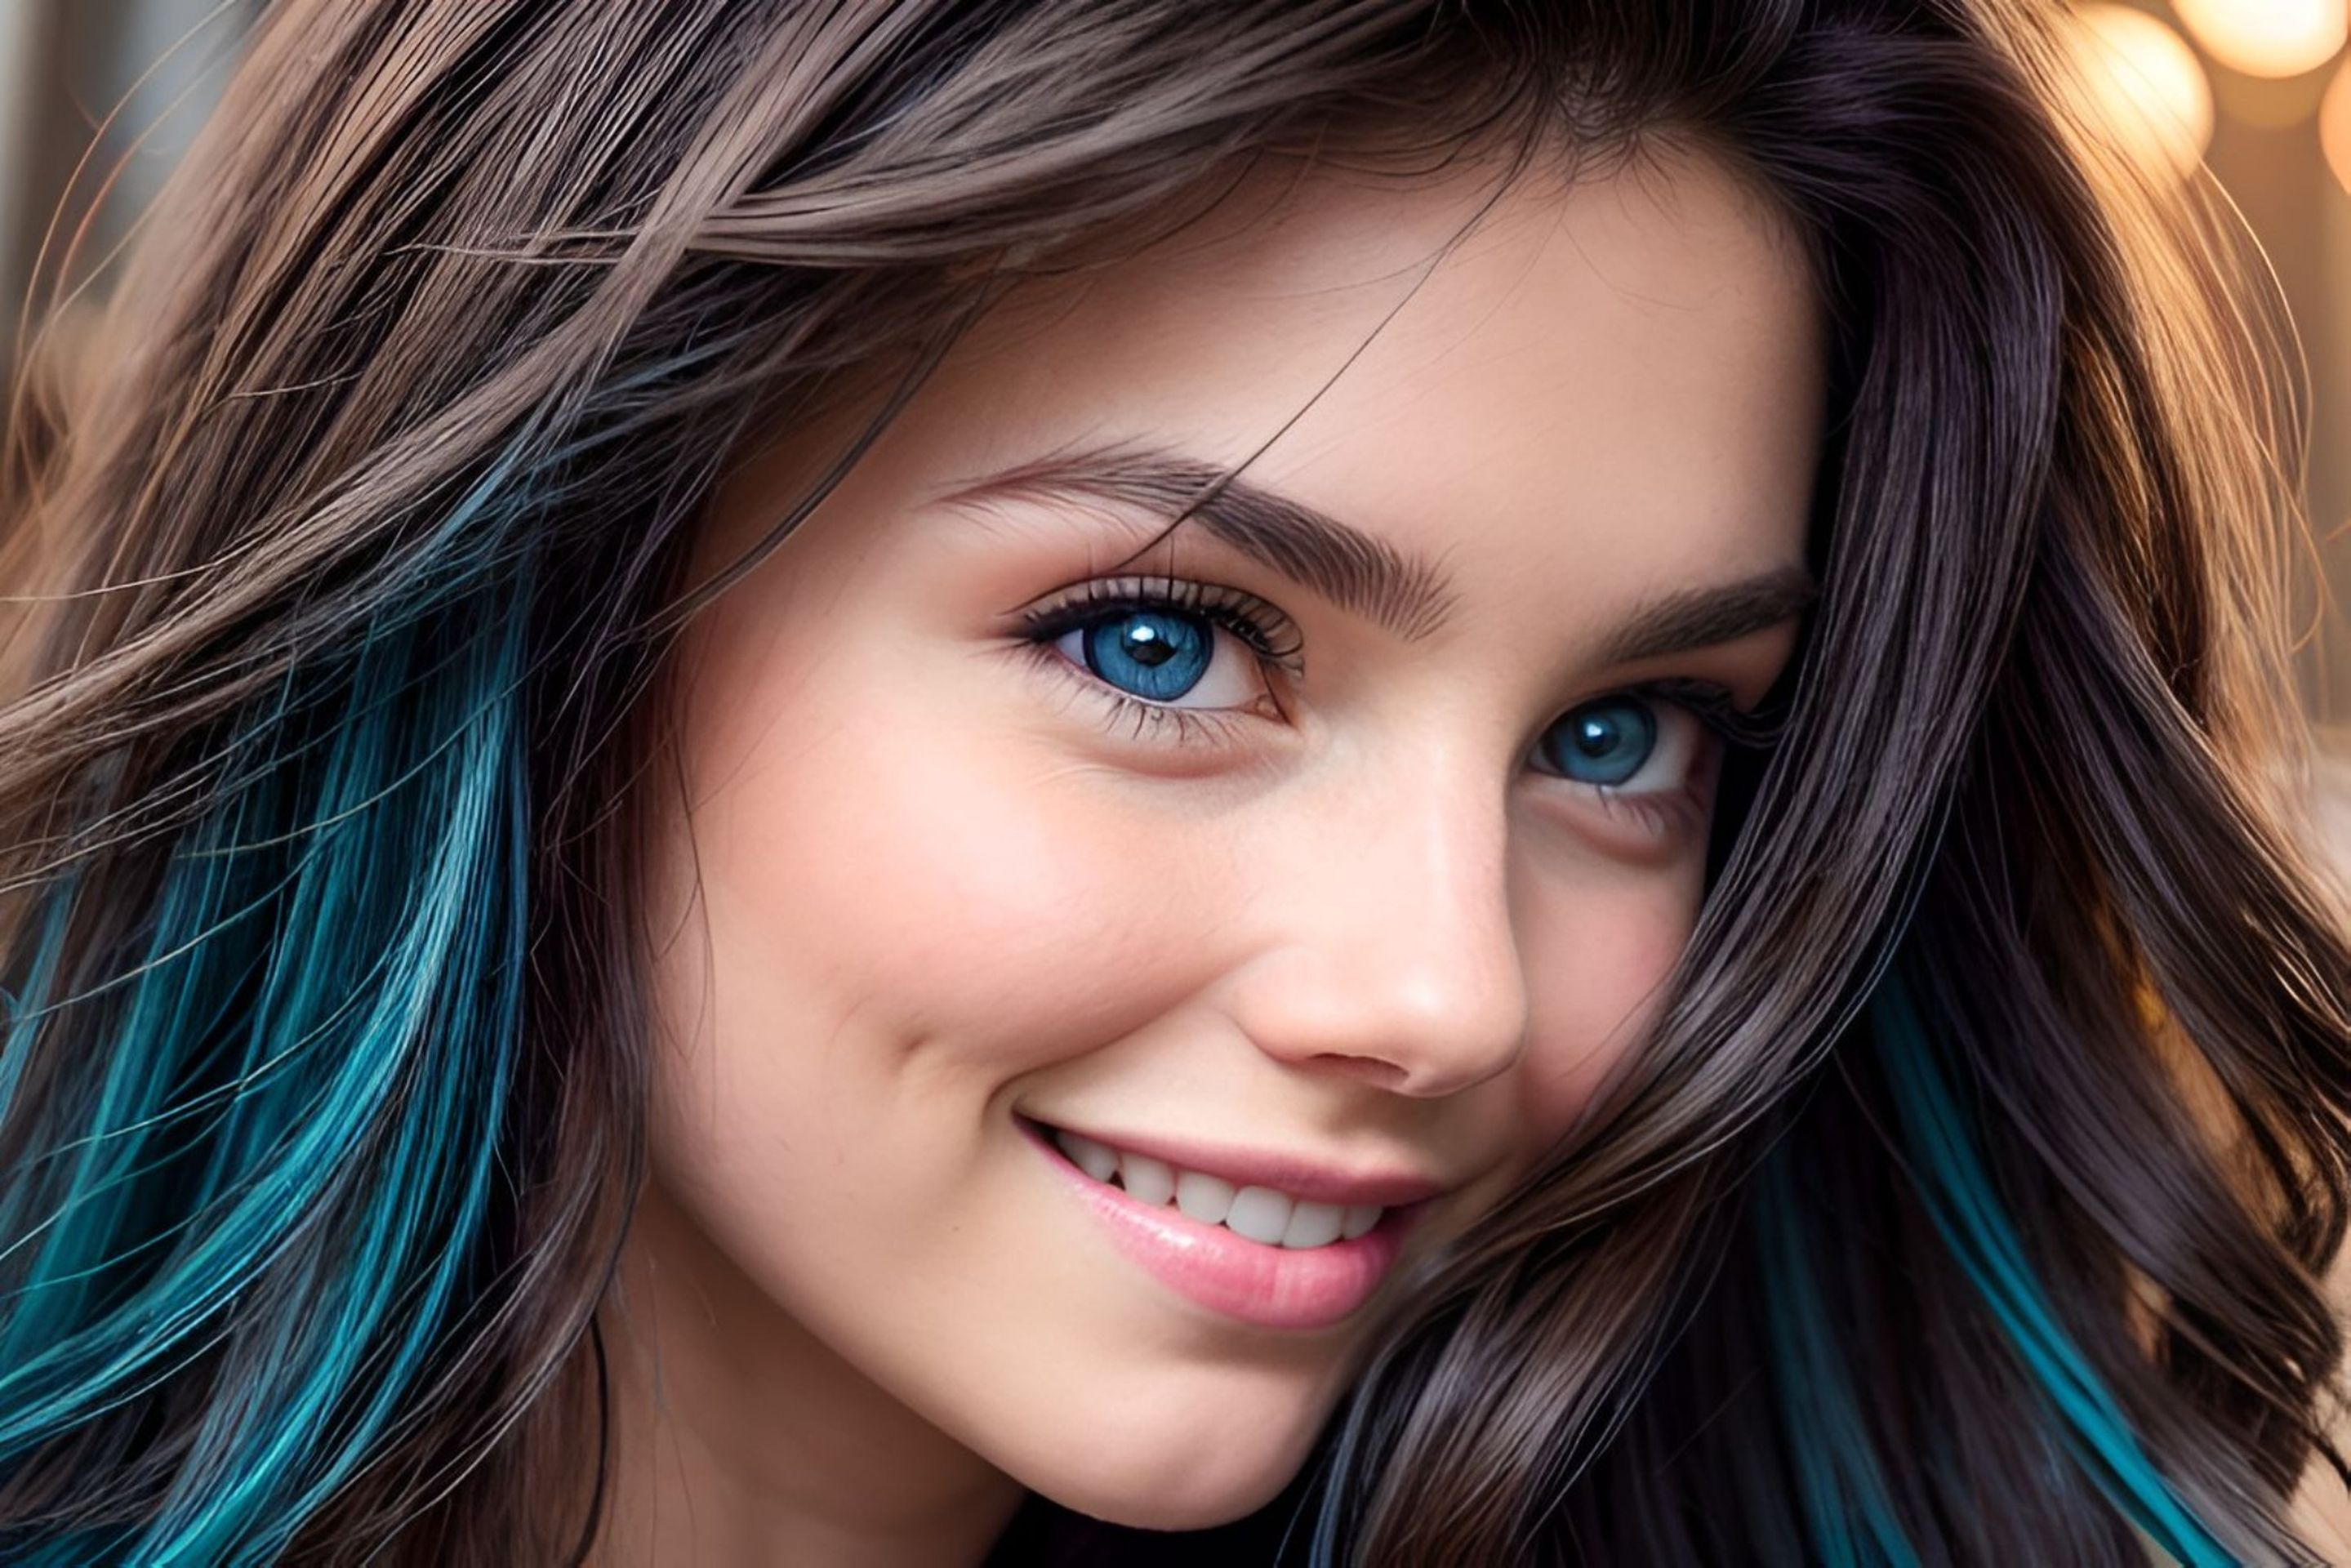 Beautiful girl, With bright blue eyes, Smiling, Photo